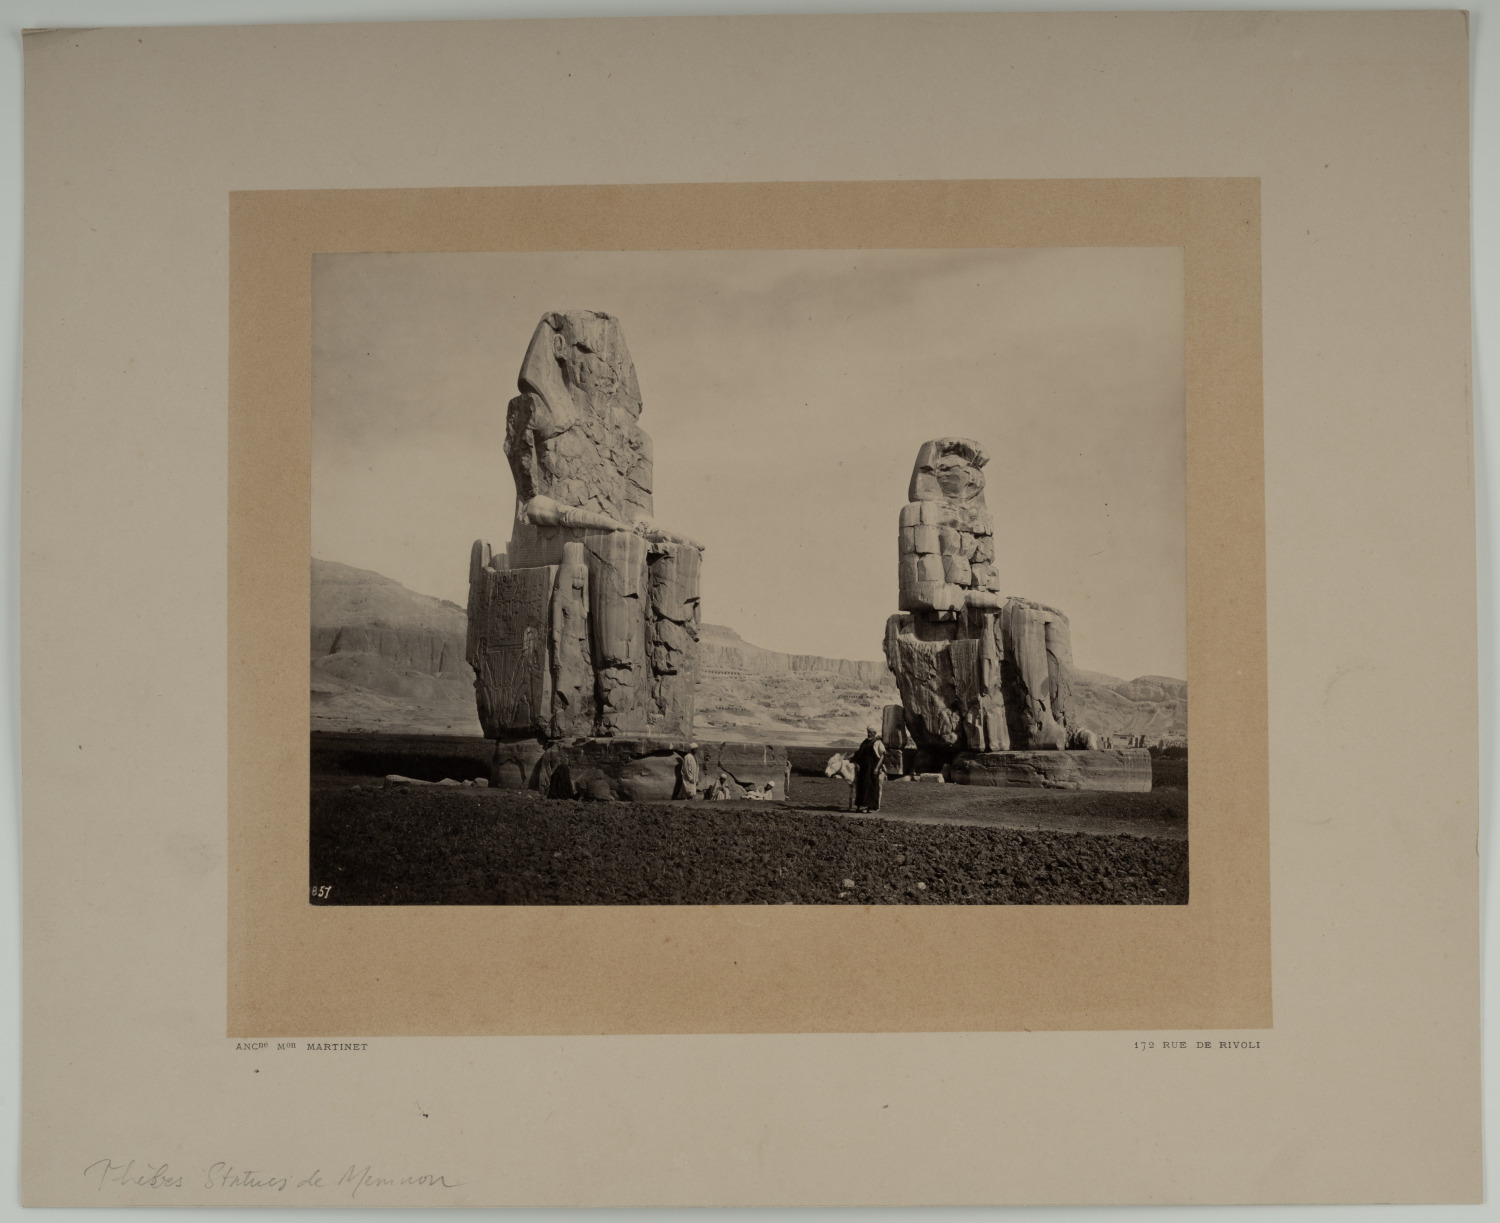 Francis Frith, Statues of Memnon, Plain of Thebes. Egypt Vintage Print.Fo